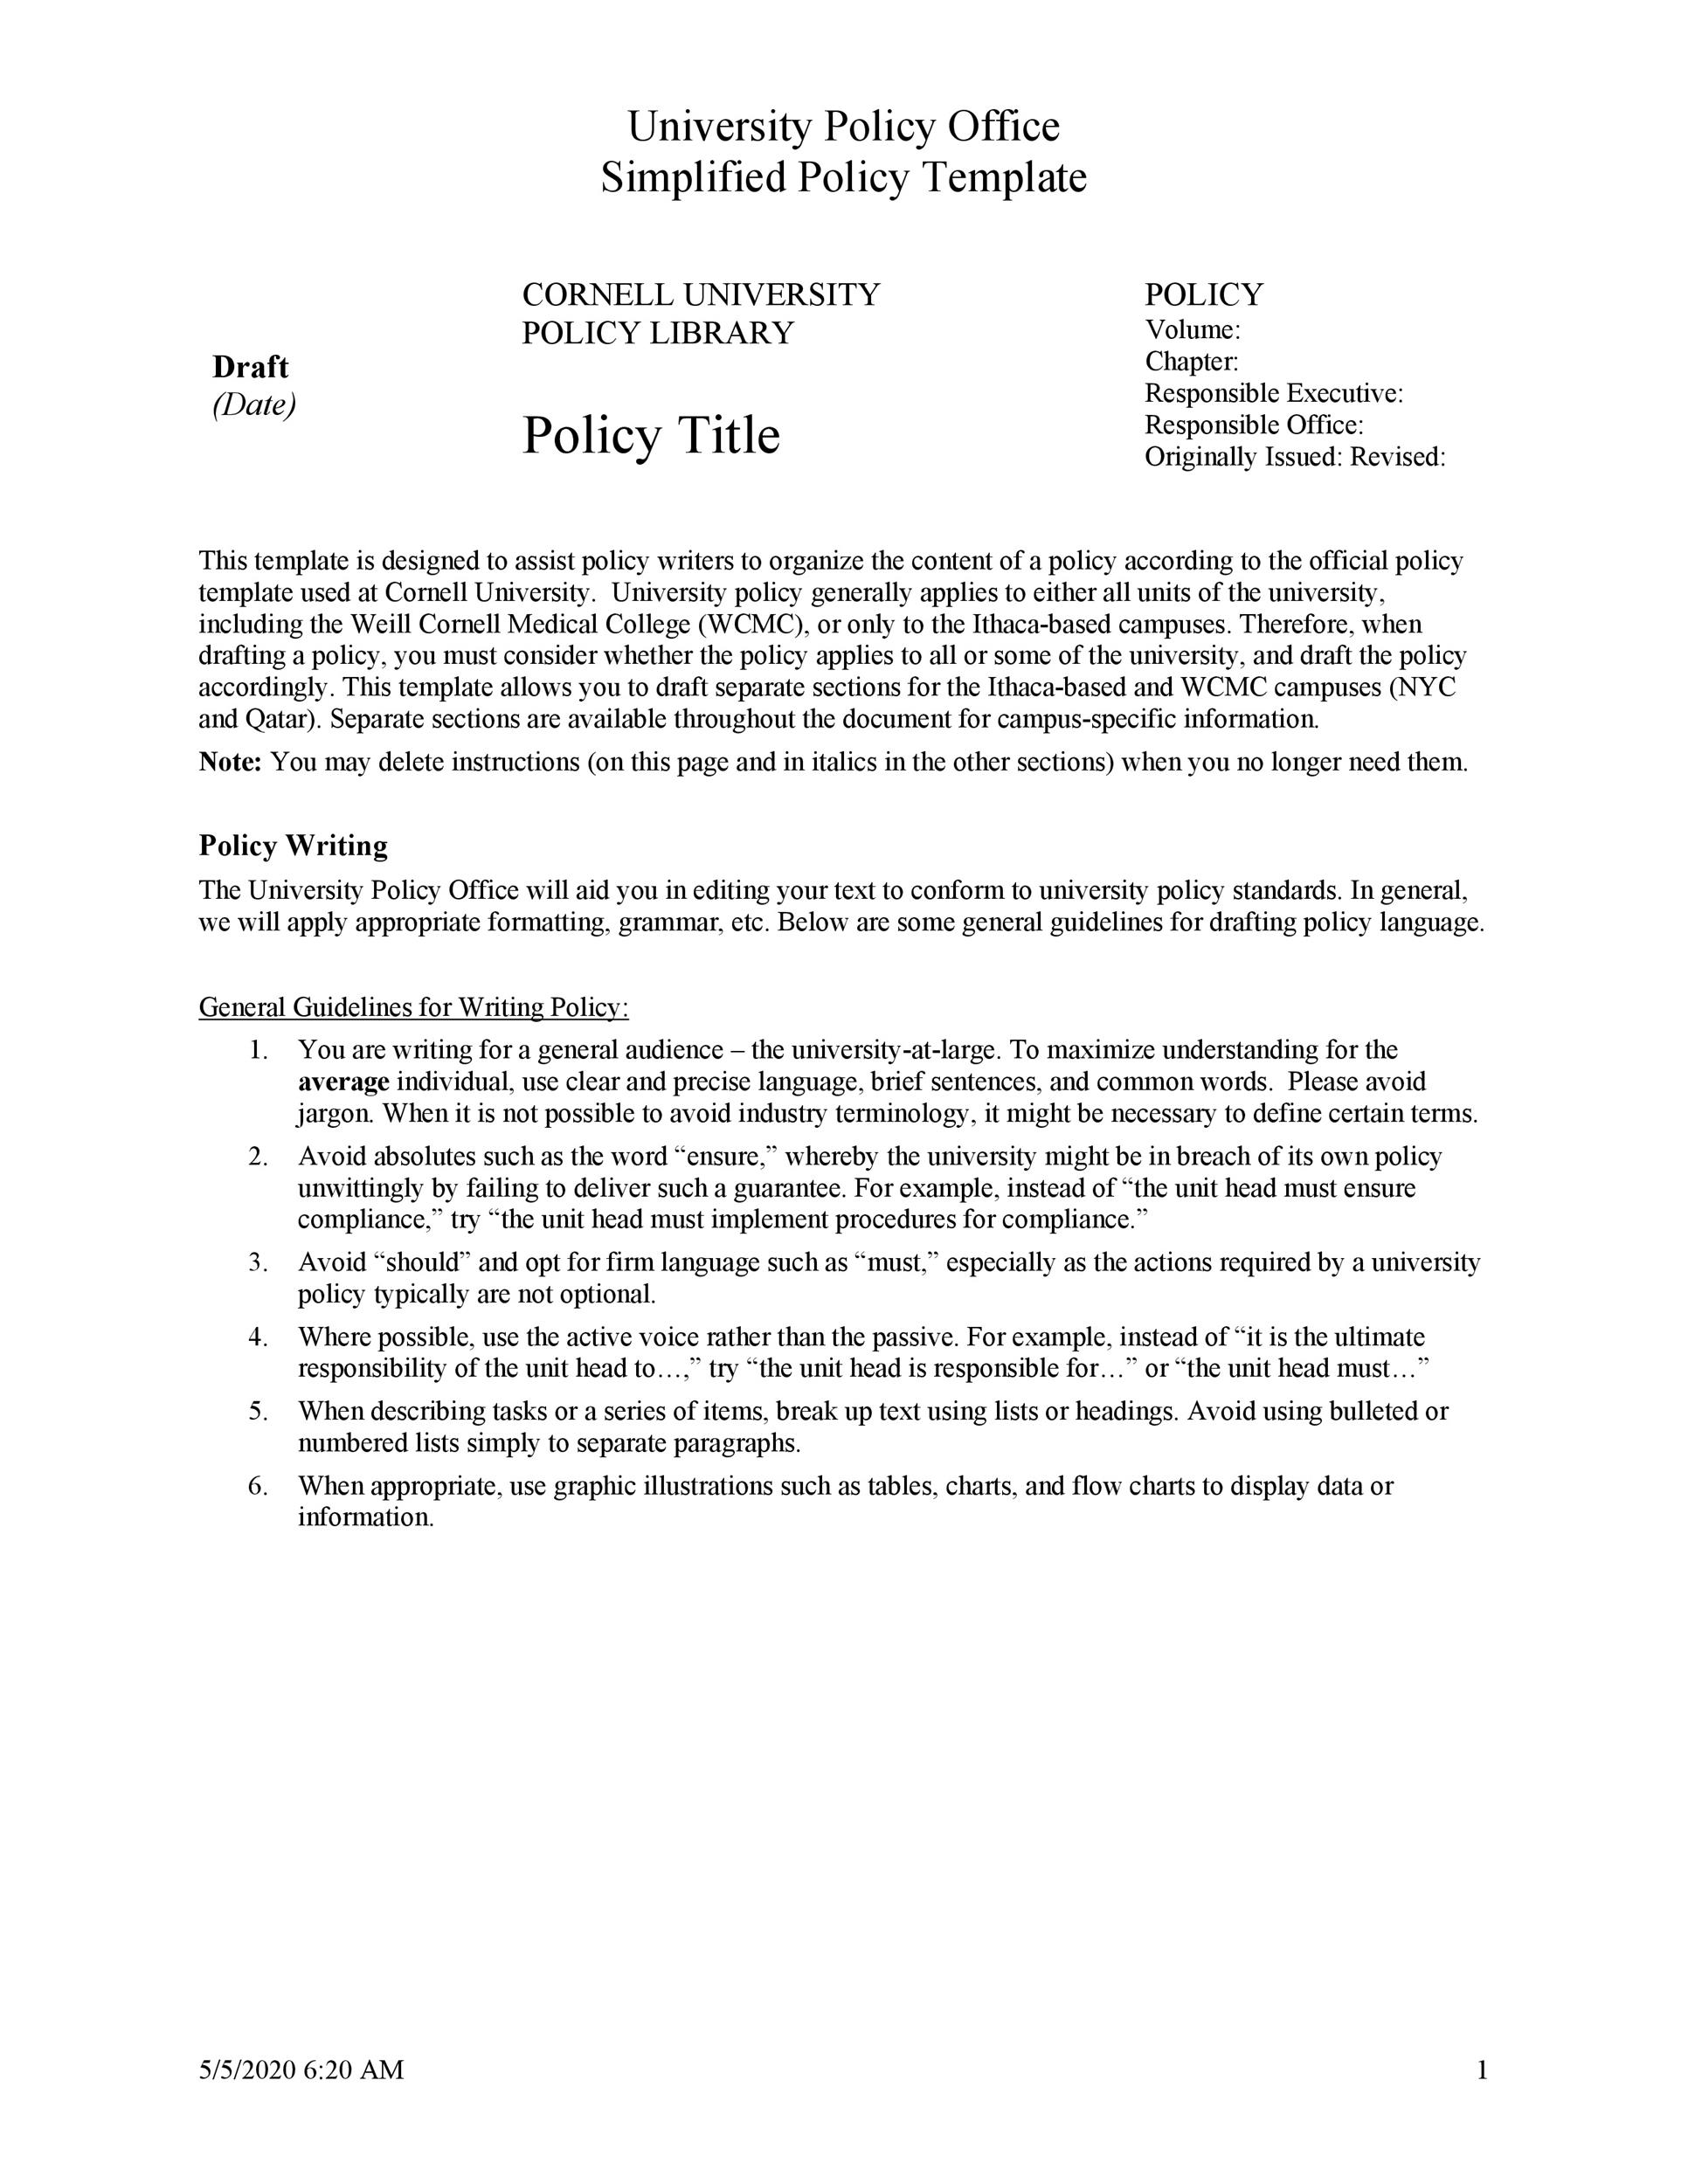 30 Professional Policy Proposal Templates [& Examples] ᐅ TemplateLab